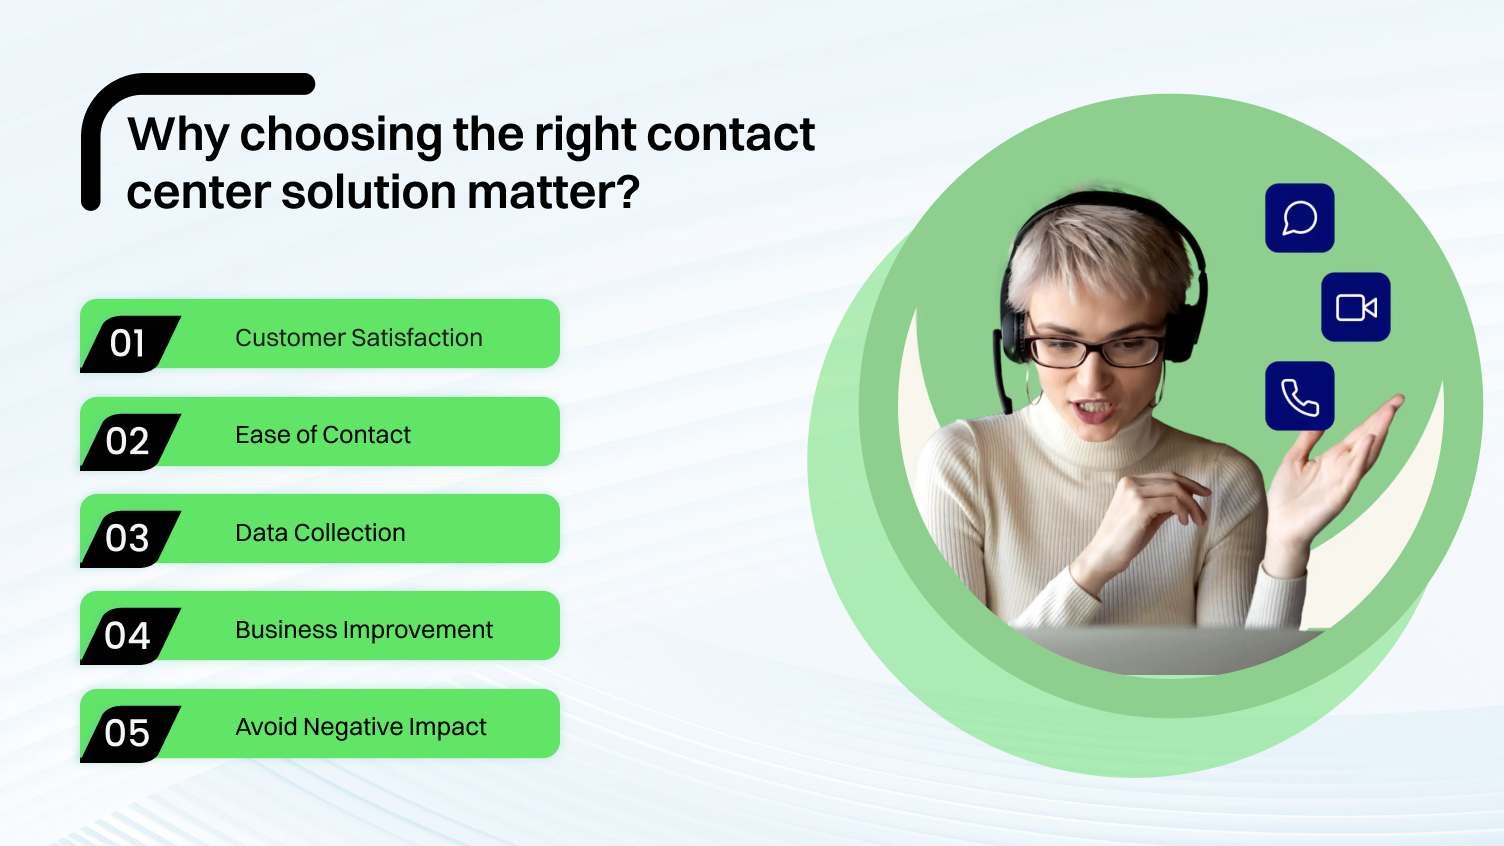 Why choosing the right contact center solution matter?